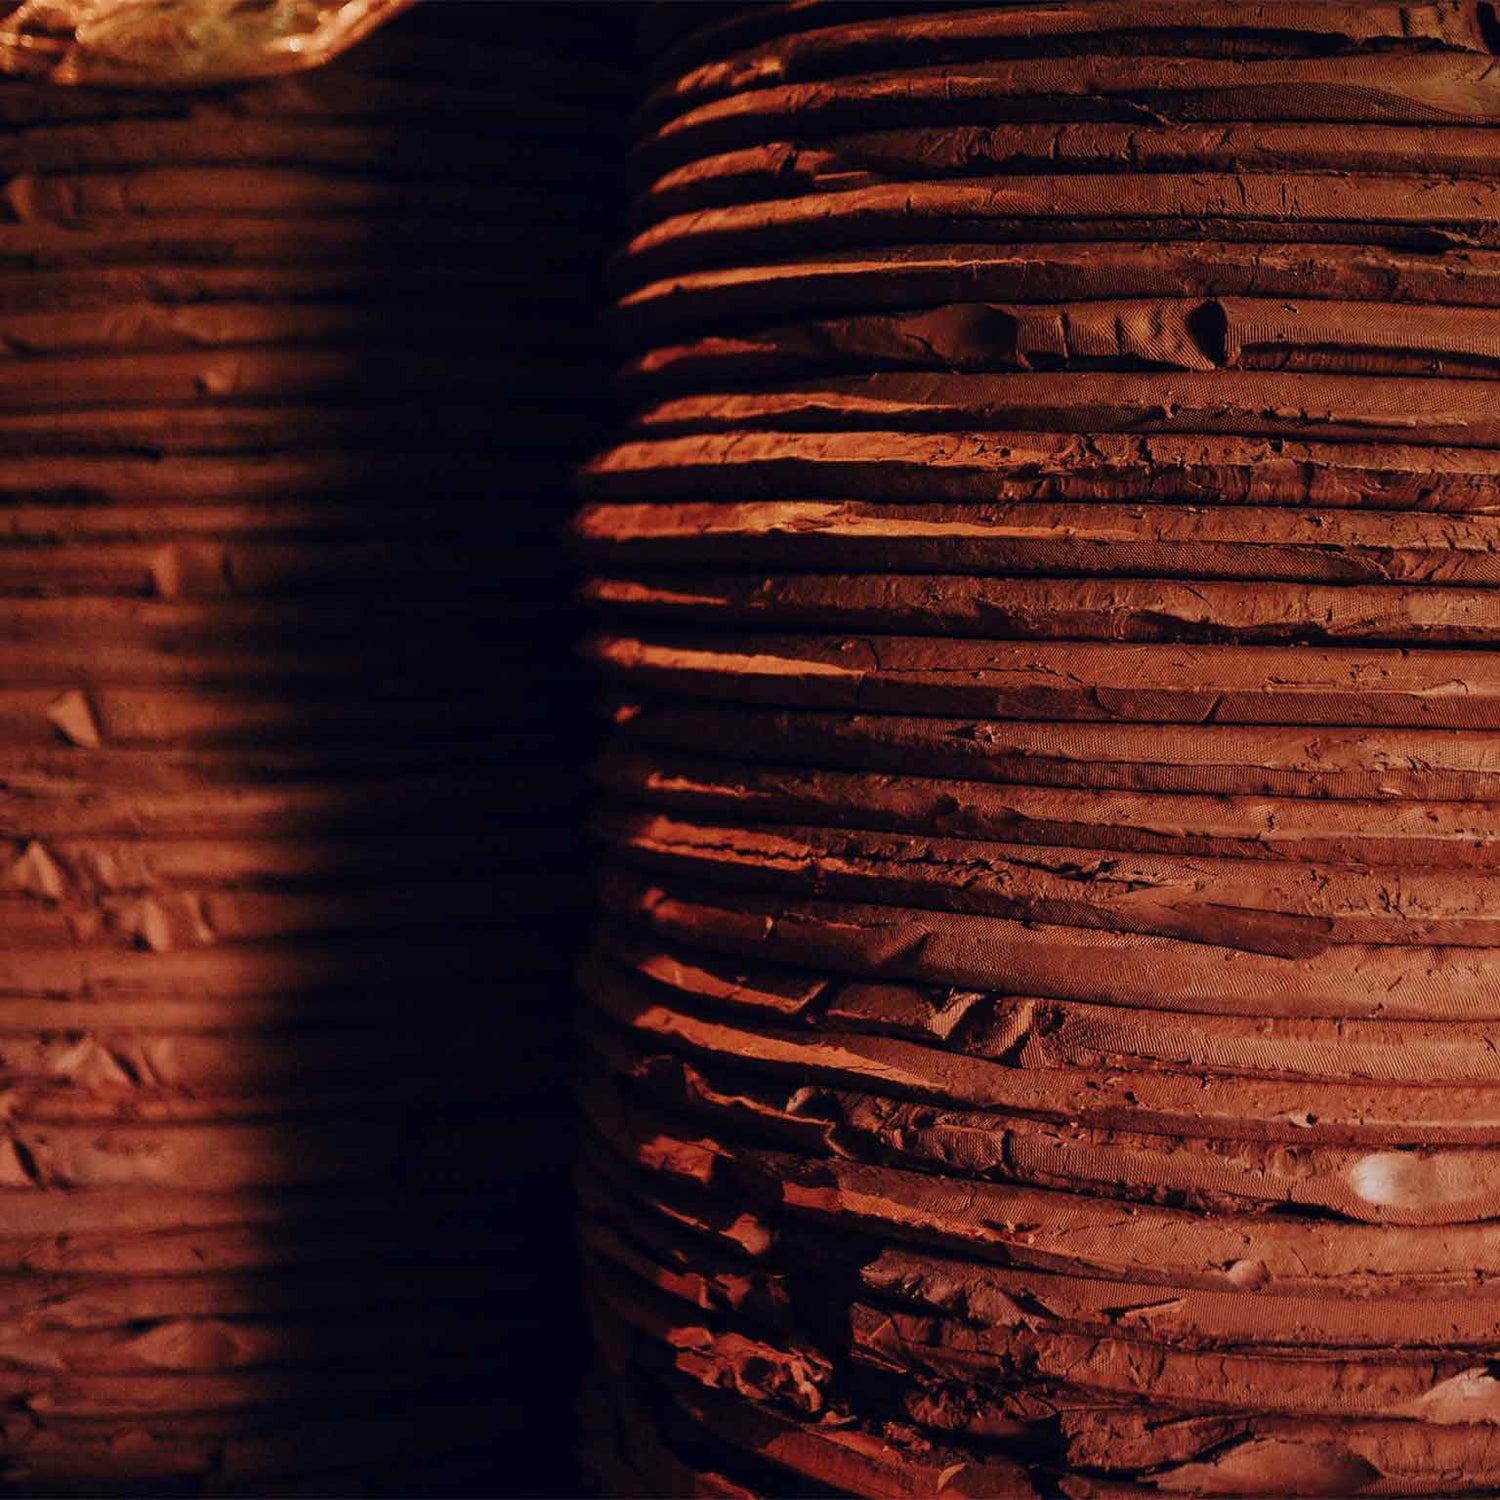 Stacks of clay